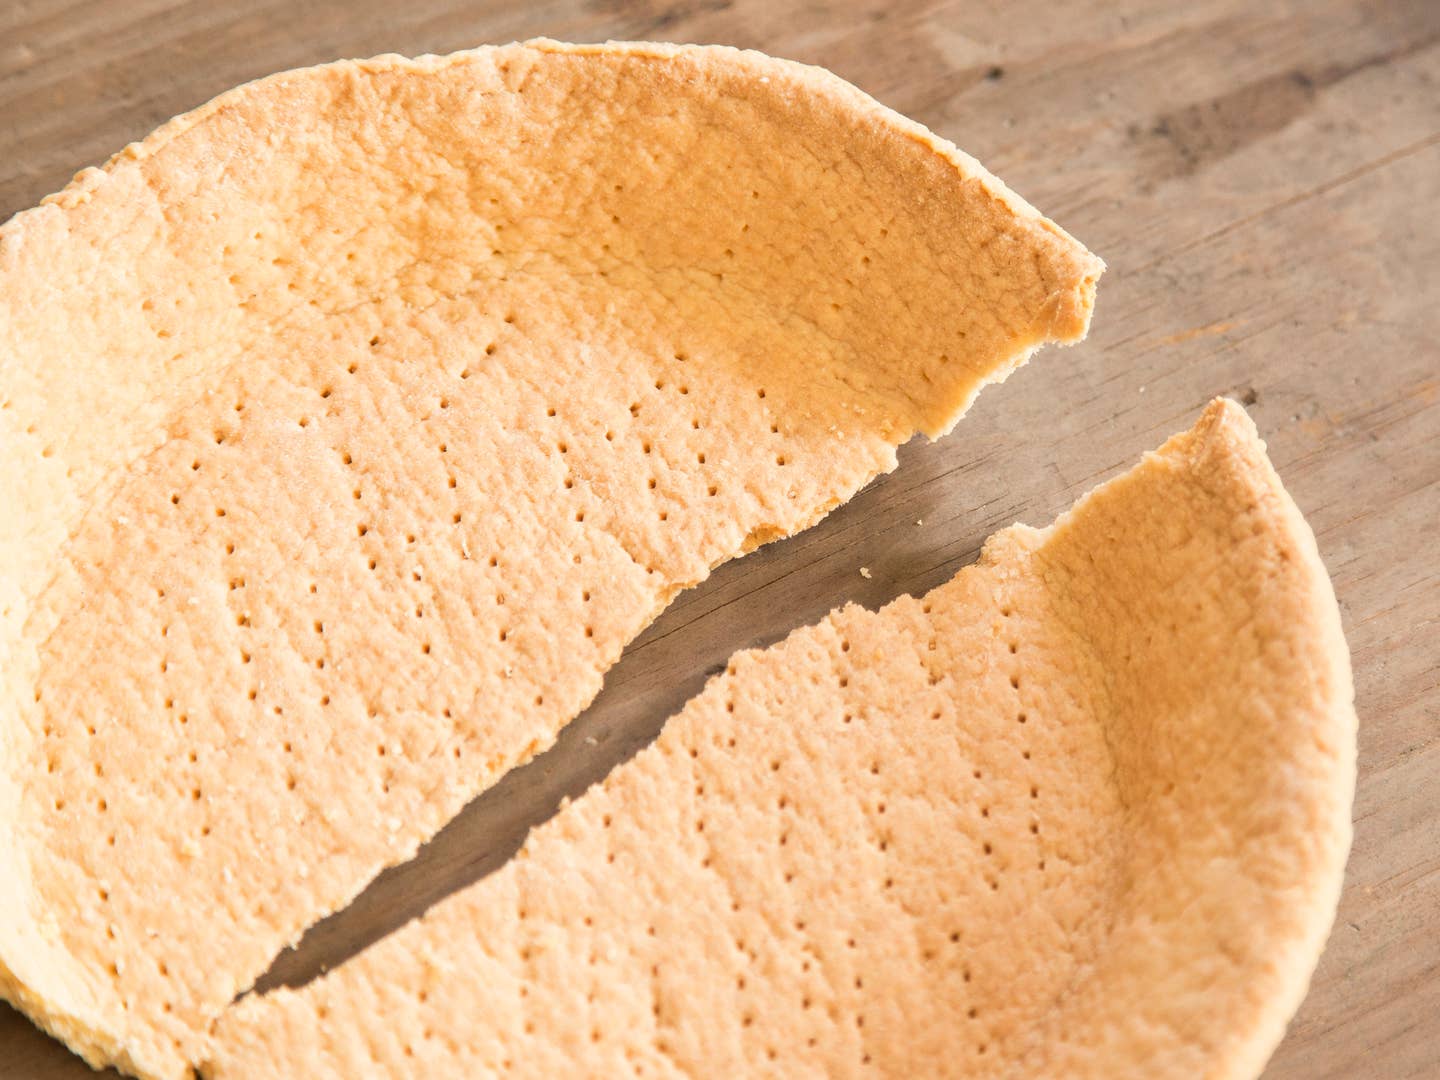 Video: How to Fix a Cracked Pie Crust